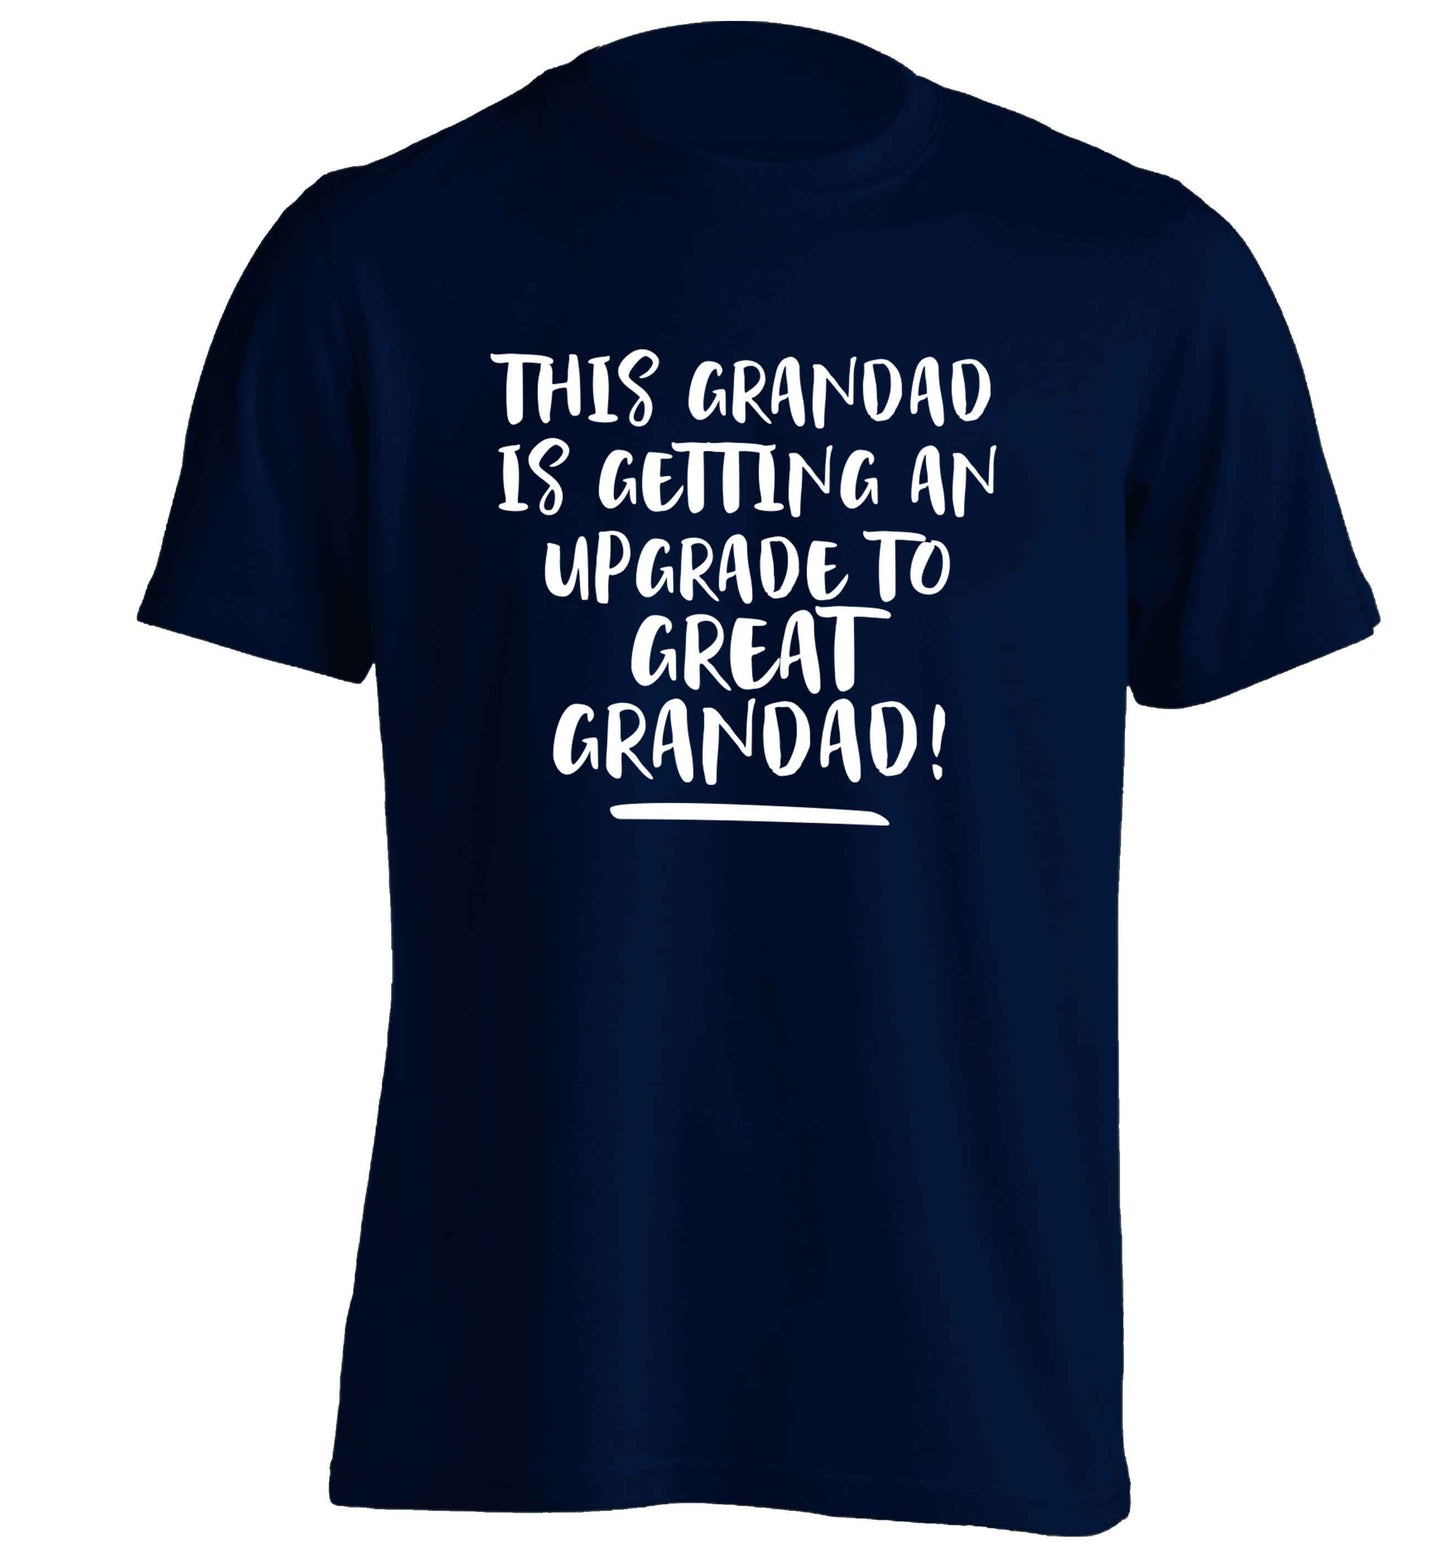 This grandad is getting an upgrade to great grandad! adults unisex navy Tshirt 2XL